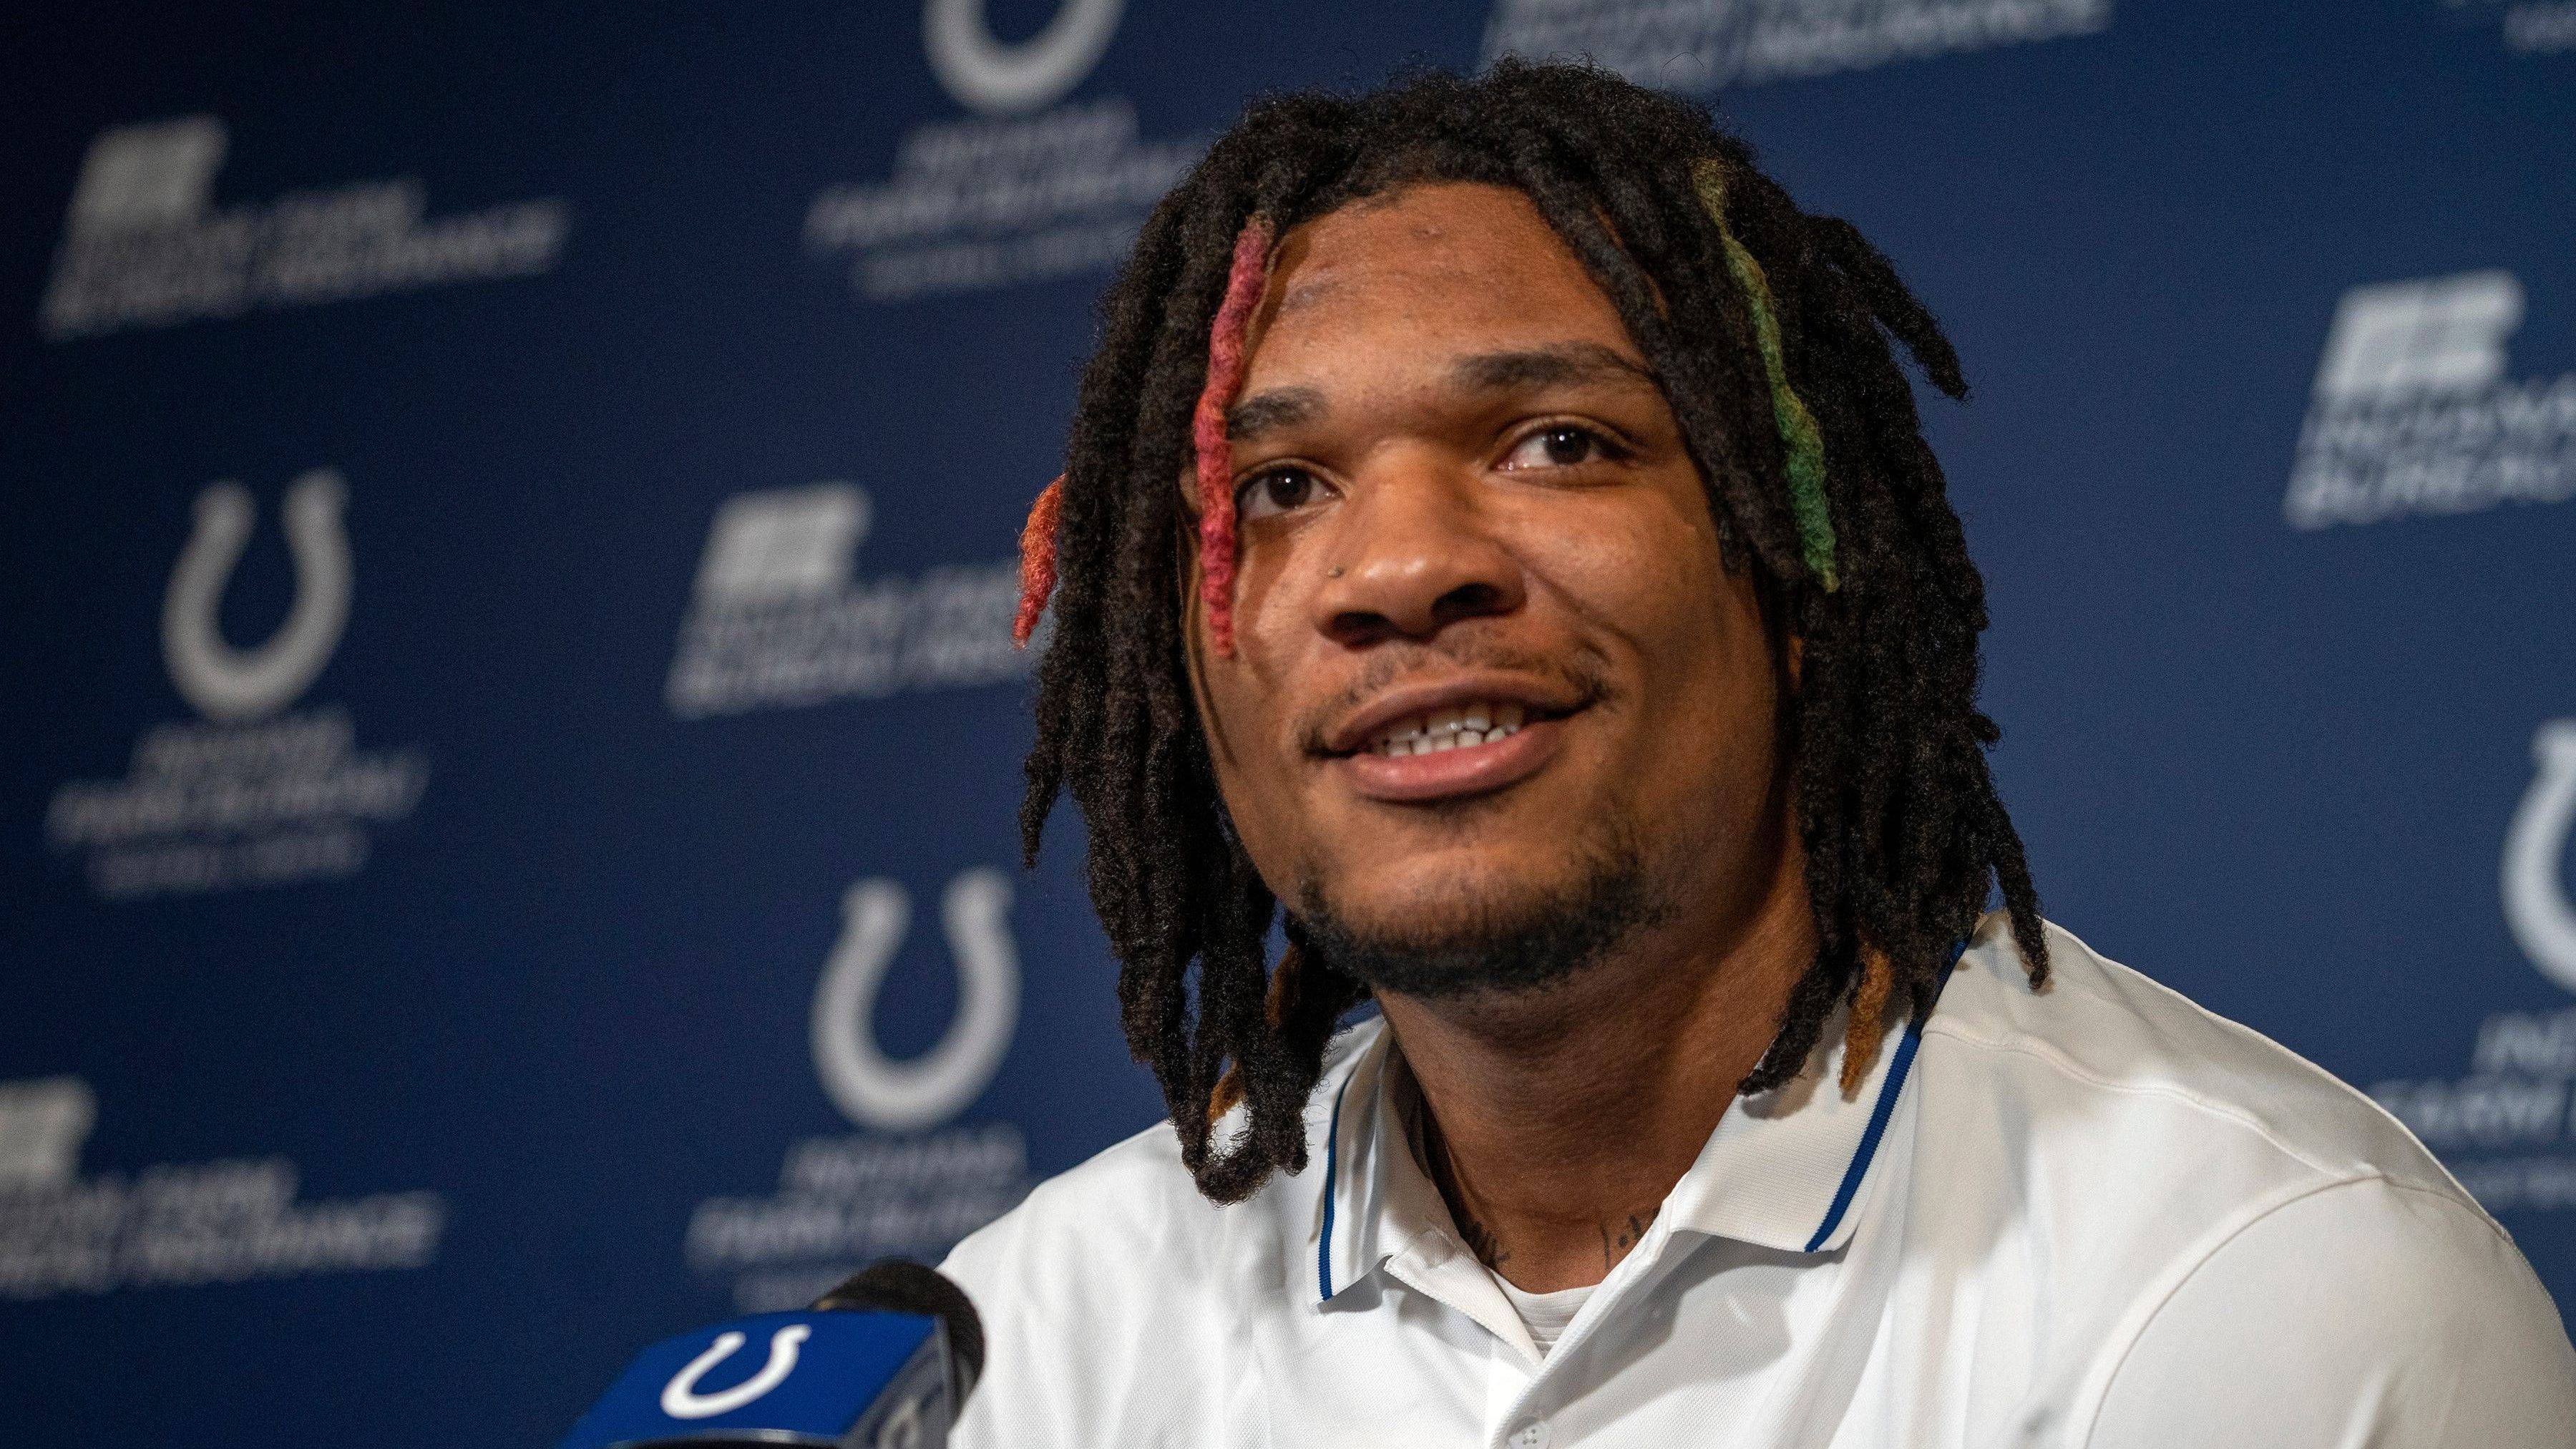 <strong>Indianapolis Colts: Anthony Richardson<br></strong>Alter: 21 Jahre, 11 Monate und 16 Tage<br>Geburtsdatum: 22. Mai 2002<br>Position: Quarterback